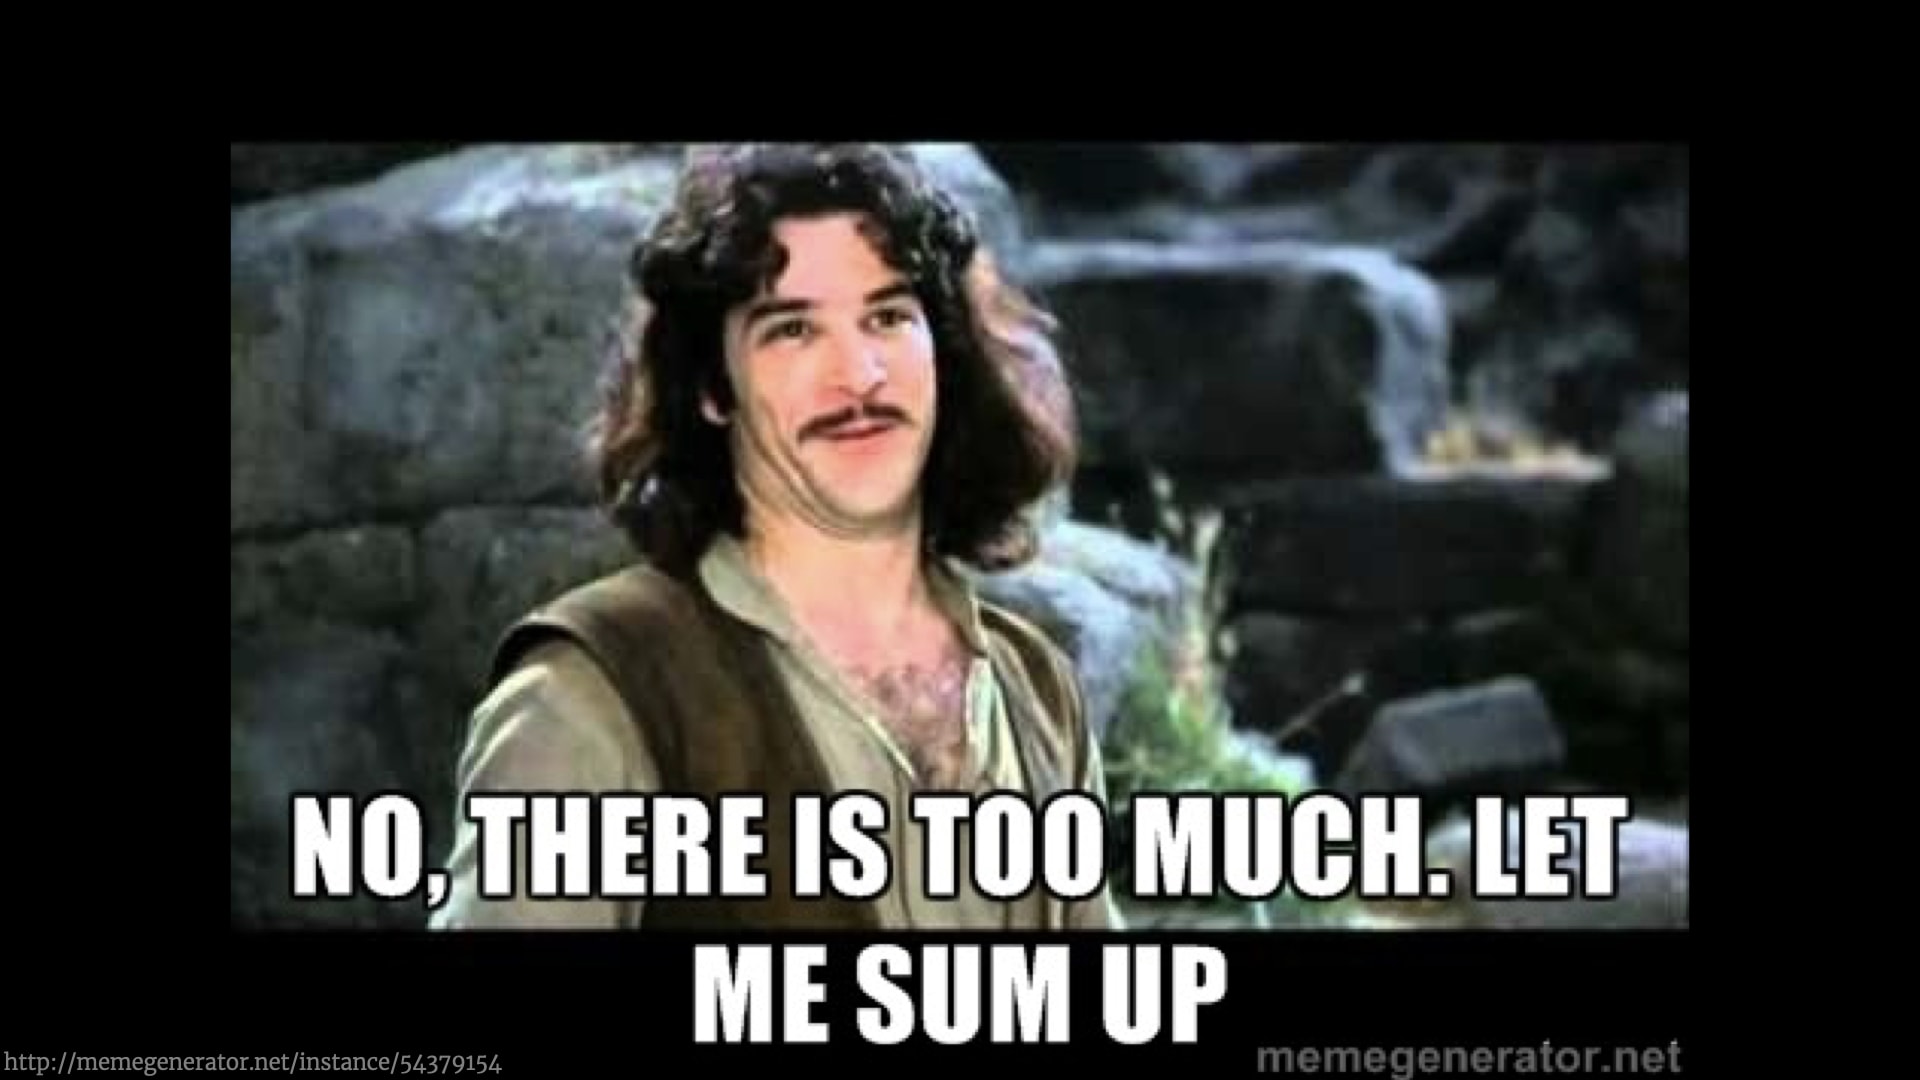 A meme style photo of the character Inigo Montoya from The Princess Bride saying 'No, there is too much. Let me sum up.'